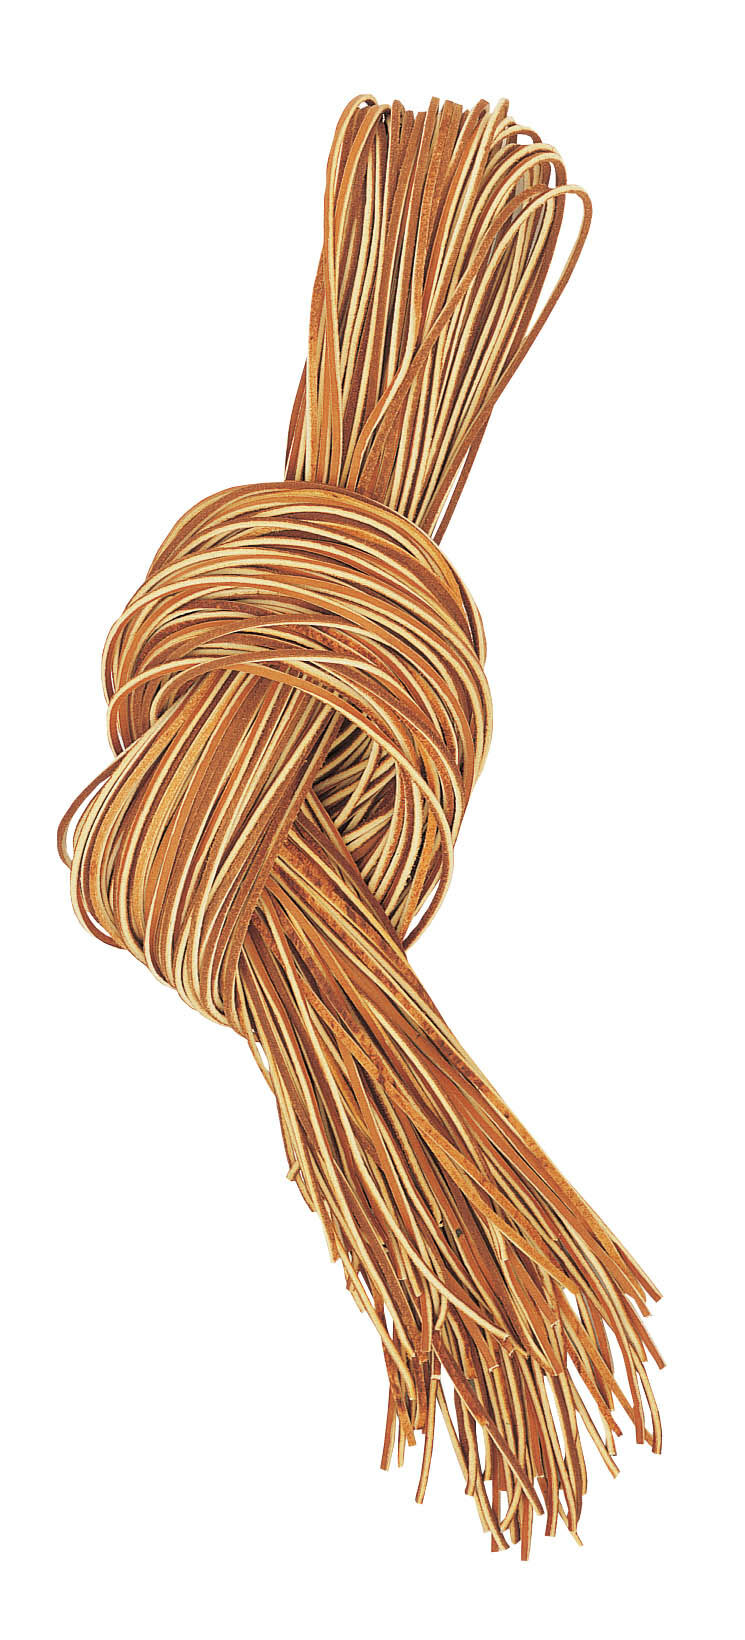 ALUM TANNED LEATHER LACES 1 8 C